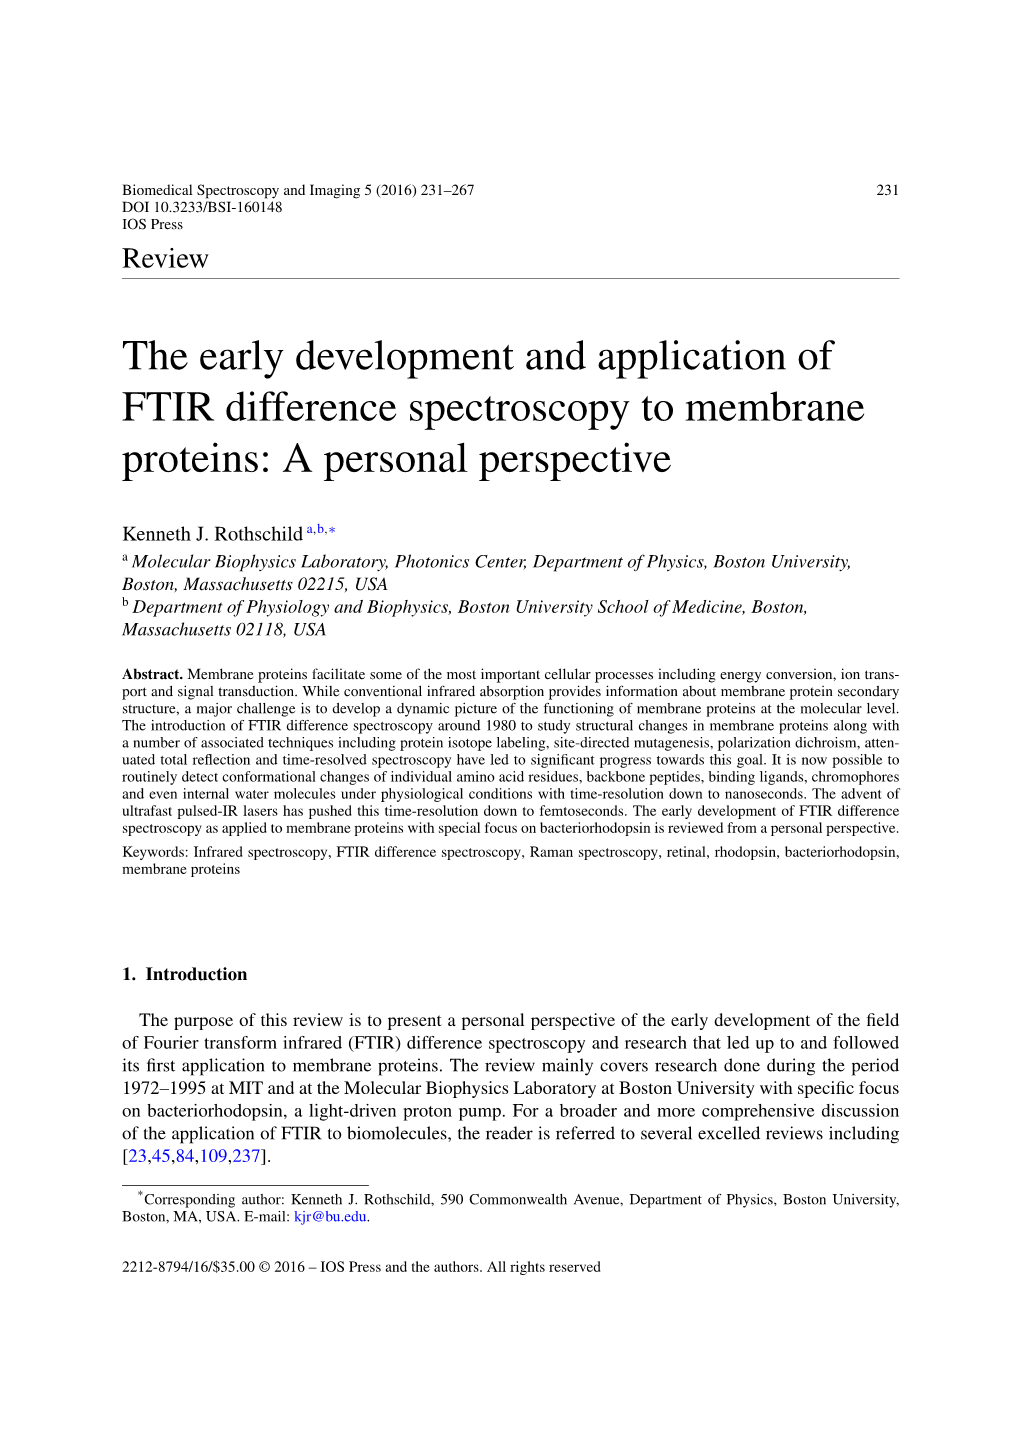 The Early Development and Application of FTIR Difference Spectroscopy to Membrane Proteins: a Personal Perspective